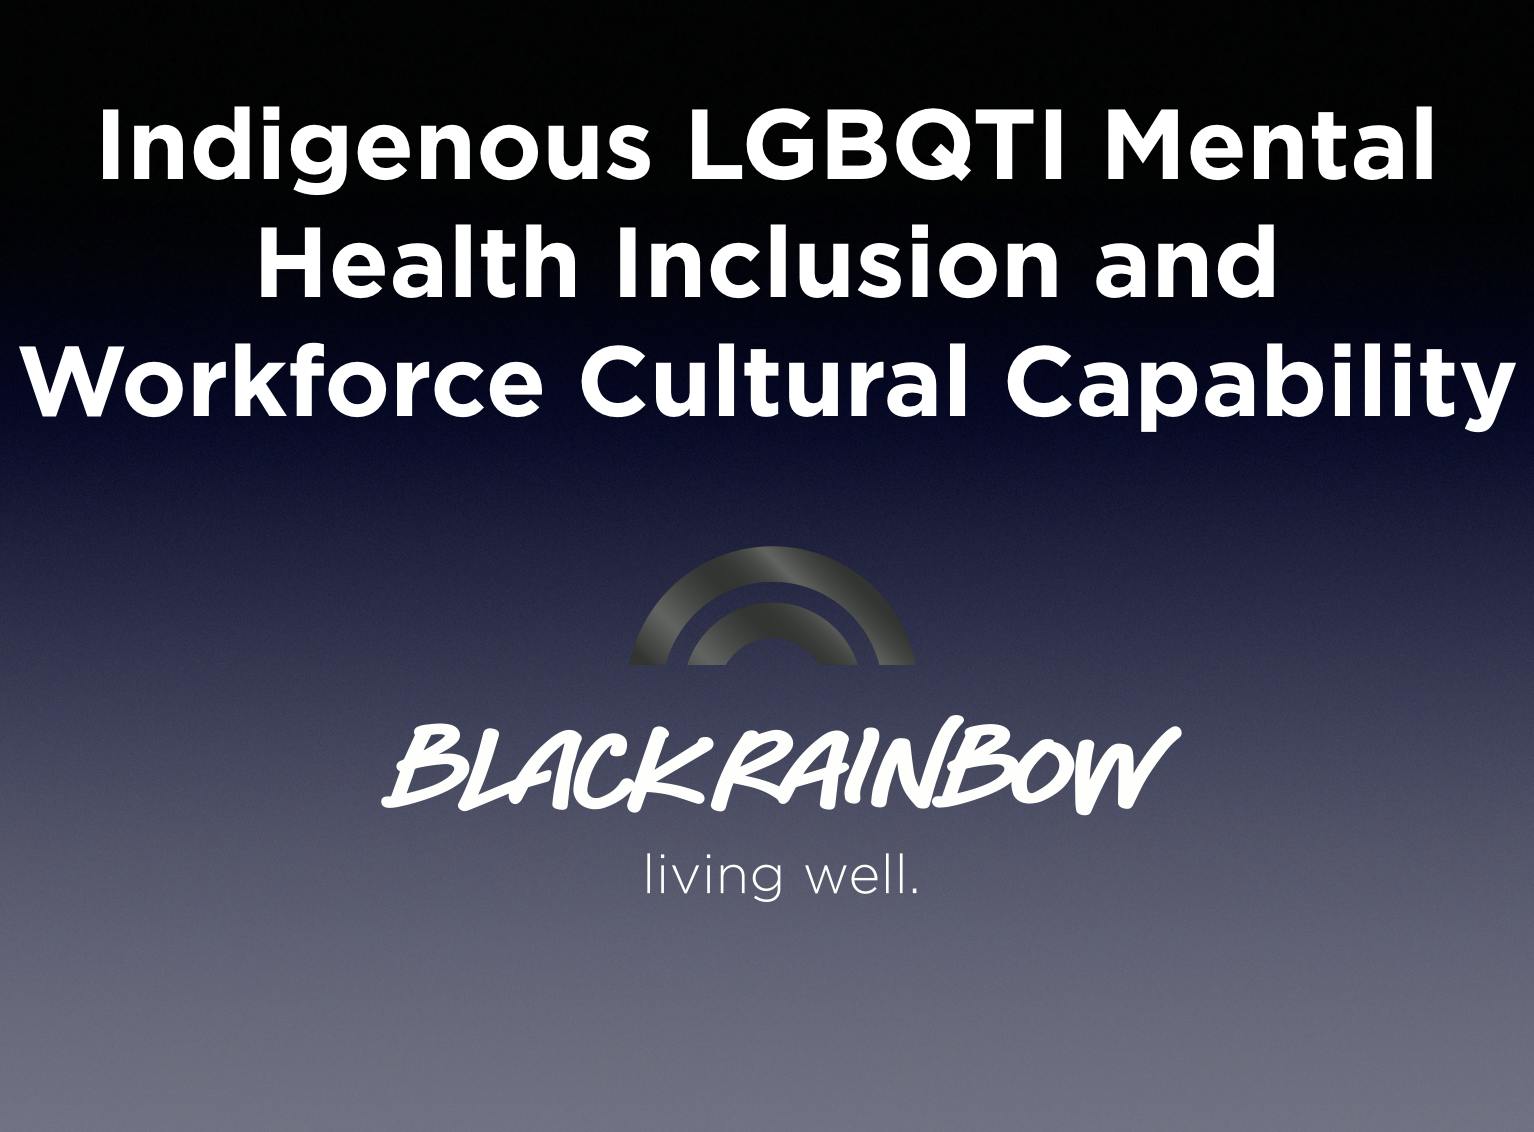 Indigenous LGBQTI Workforce Cultural Capability and Inclusion in Mental Health 